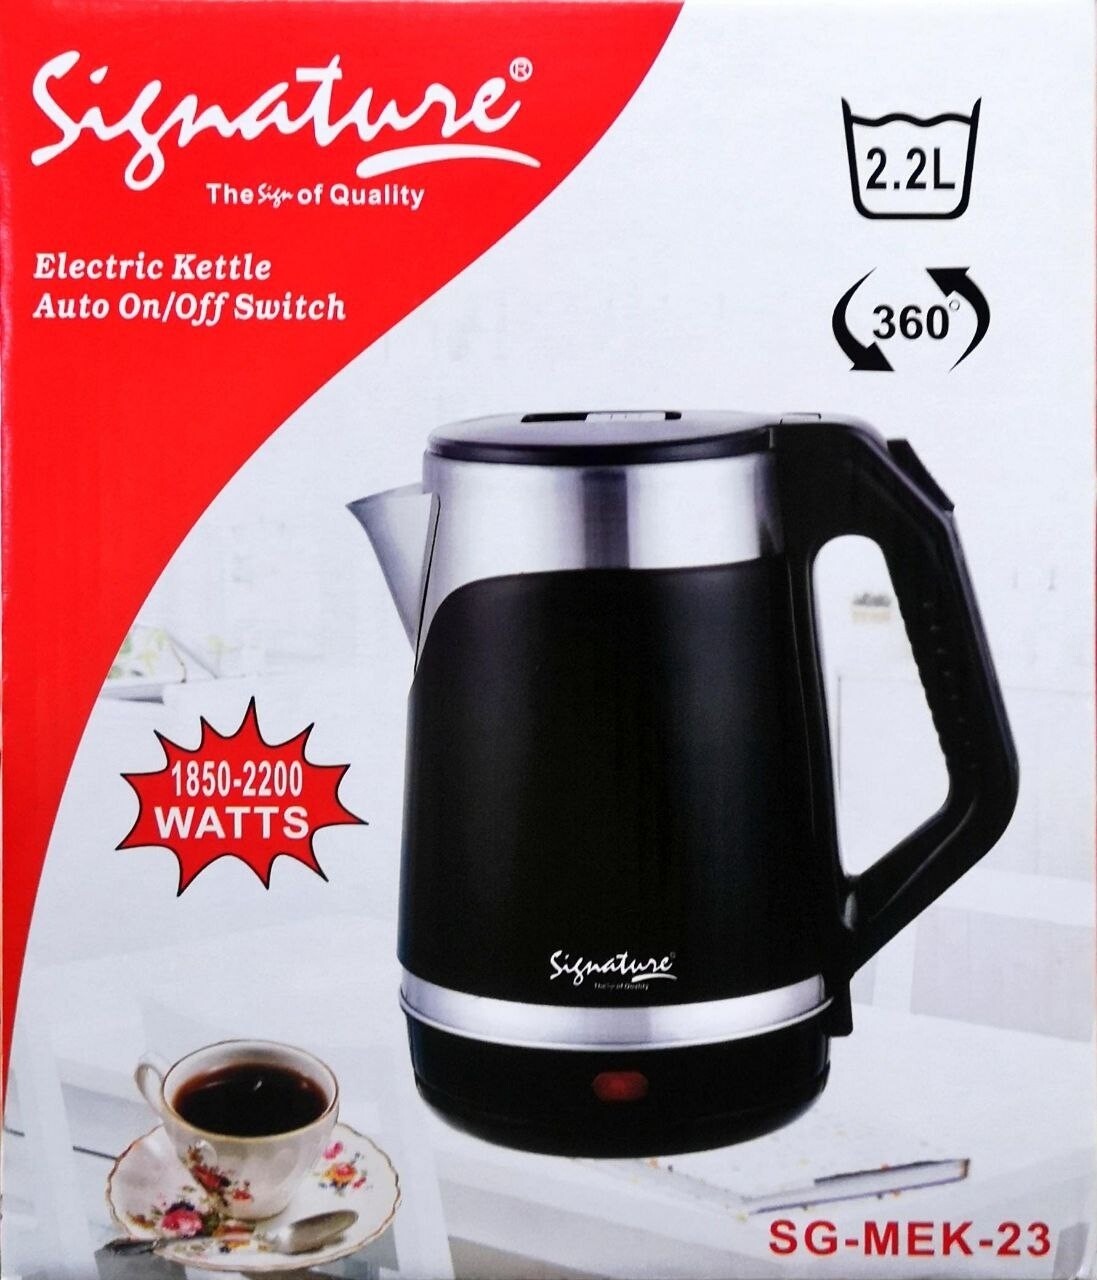 Signature electric kettle 2.2L auto on and off switch SG-MEK-23